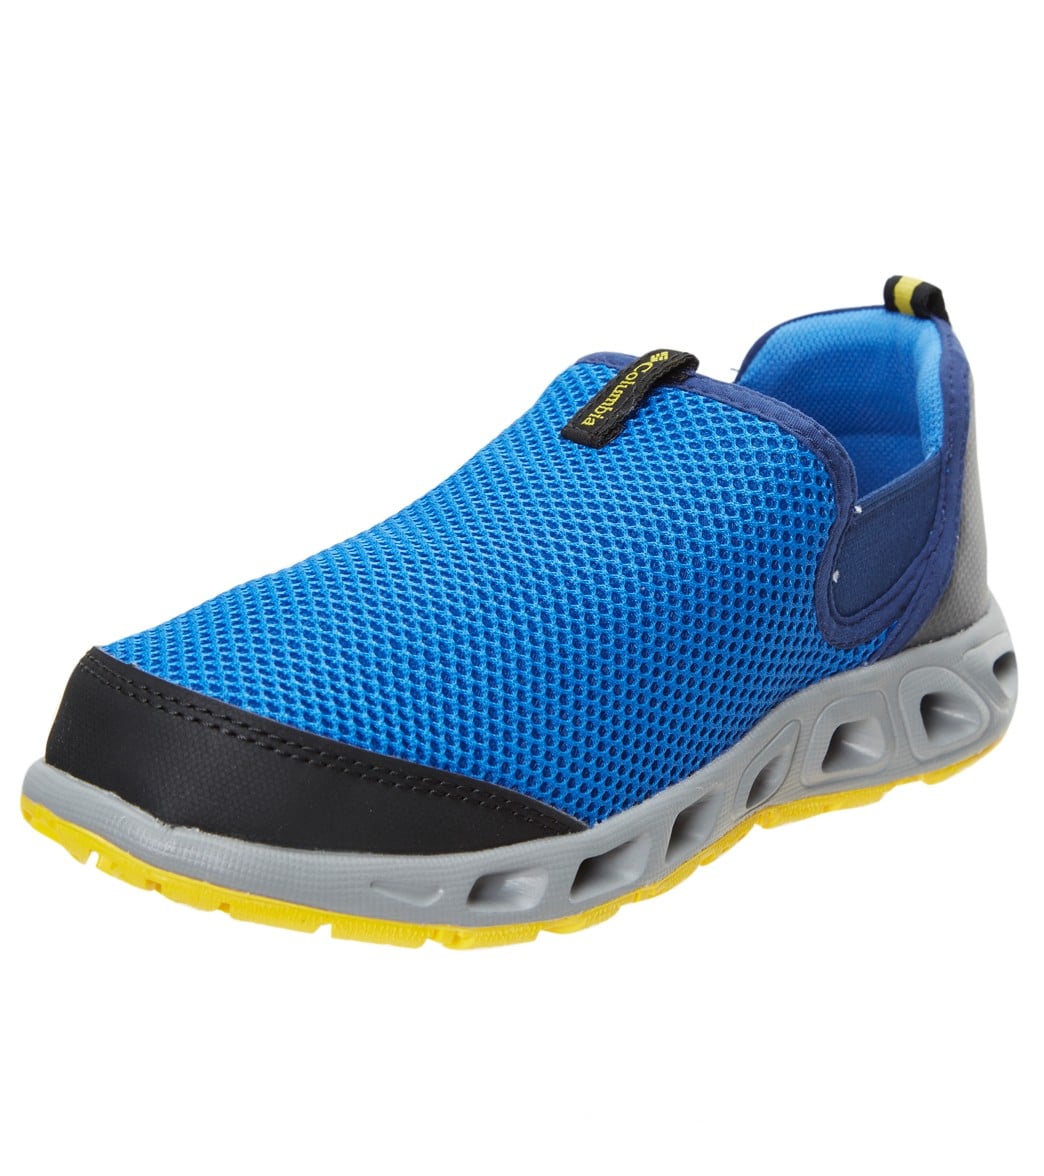 Columbia Youth Moccaswim Land & Water Shoe - Stormy Blue Deep Yellow 7 Blue - Swimoutlet.com